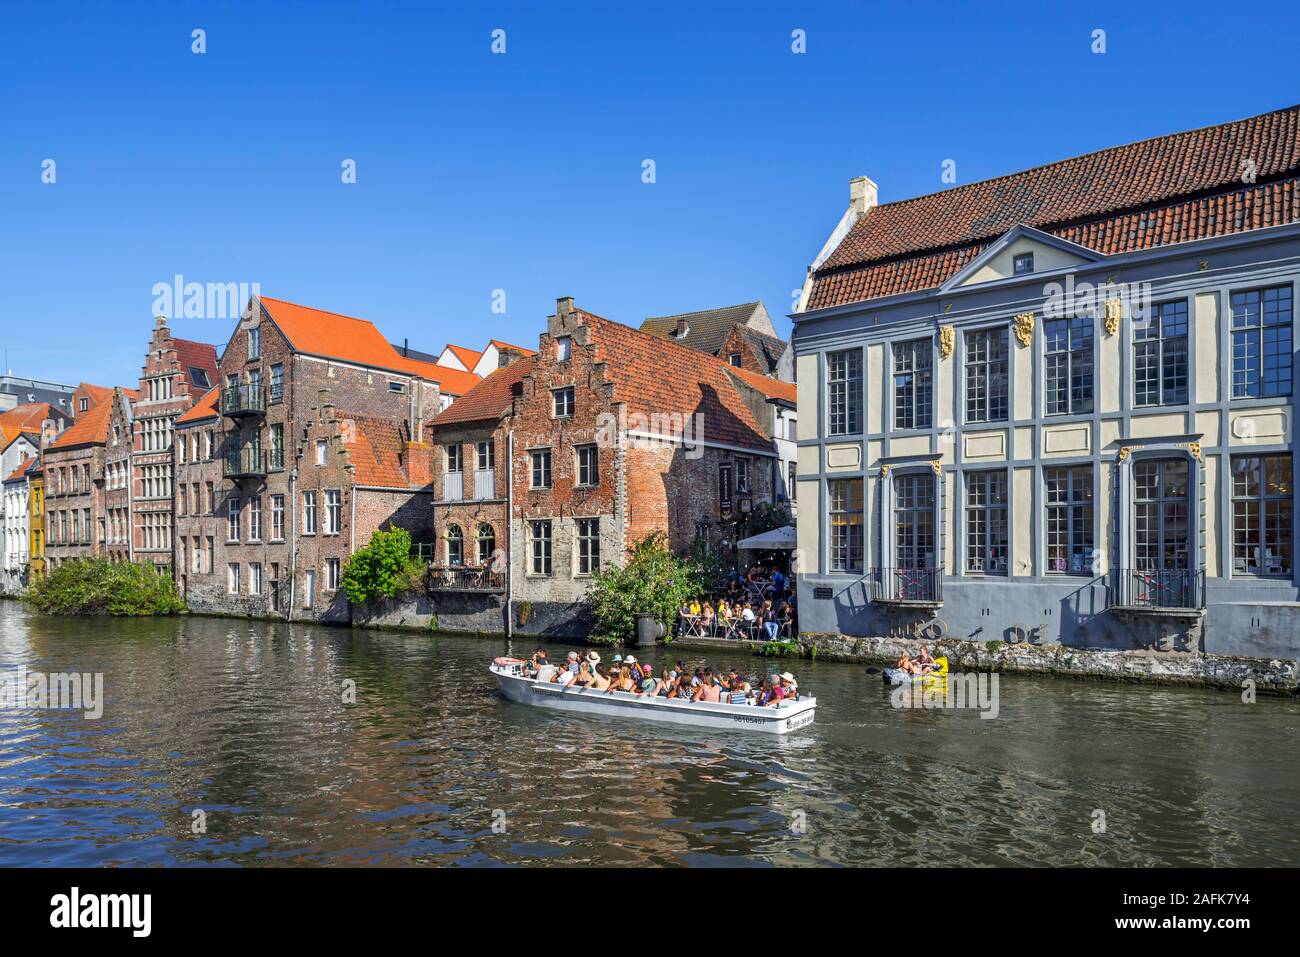 Sightseeing boat with tourists navigating on the river Leie / Lys along medieval houses in the historical city center of Ghent, East Flanders, Belgium Stock Photo